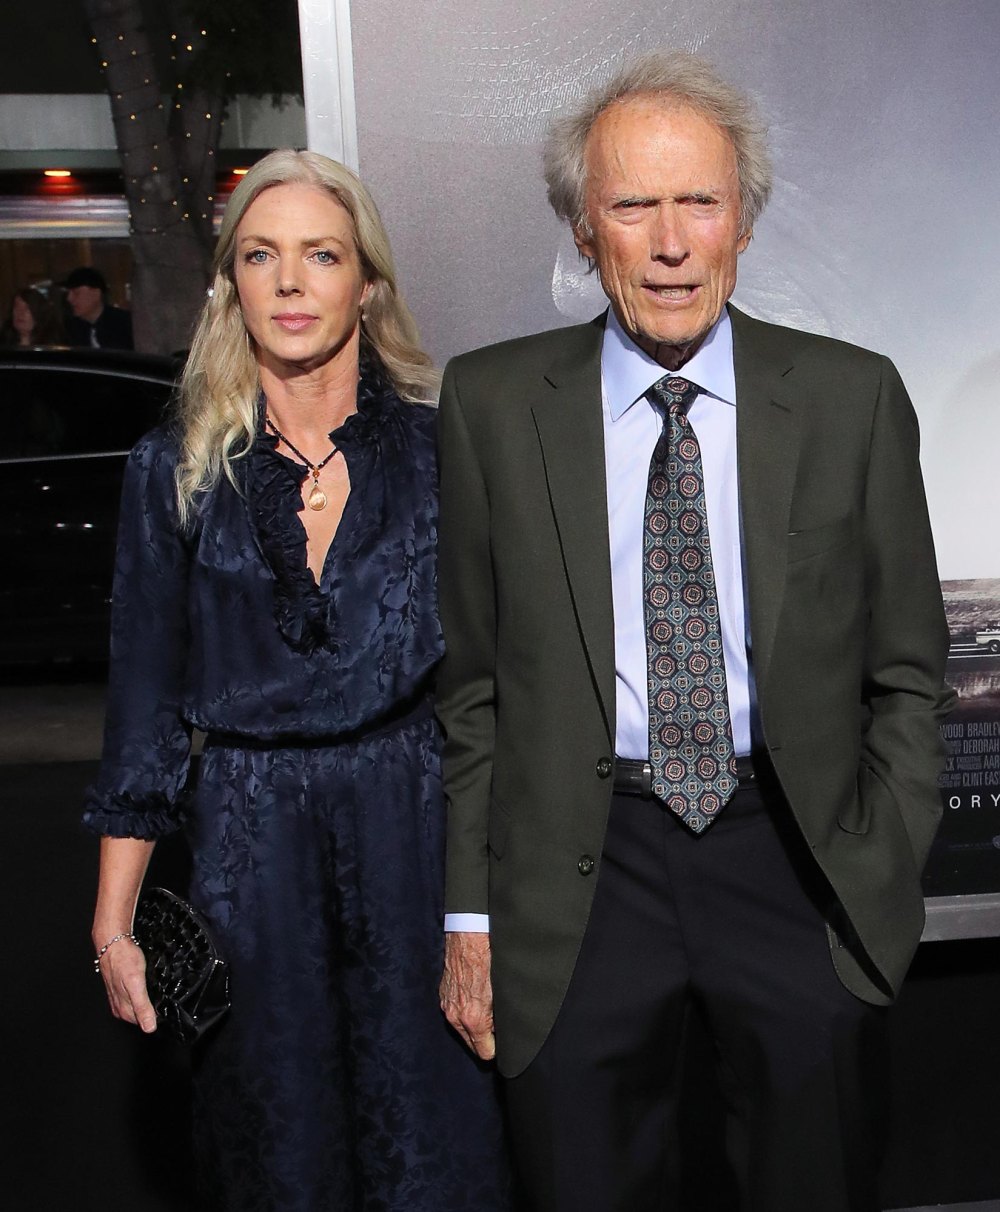 Cause of death of Clint Eastwood's long-time partner Christina Sandera announced 140